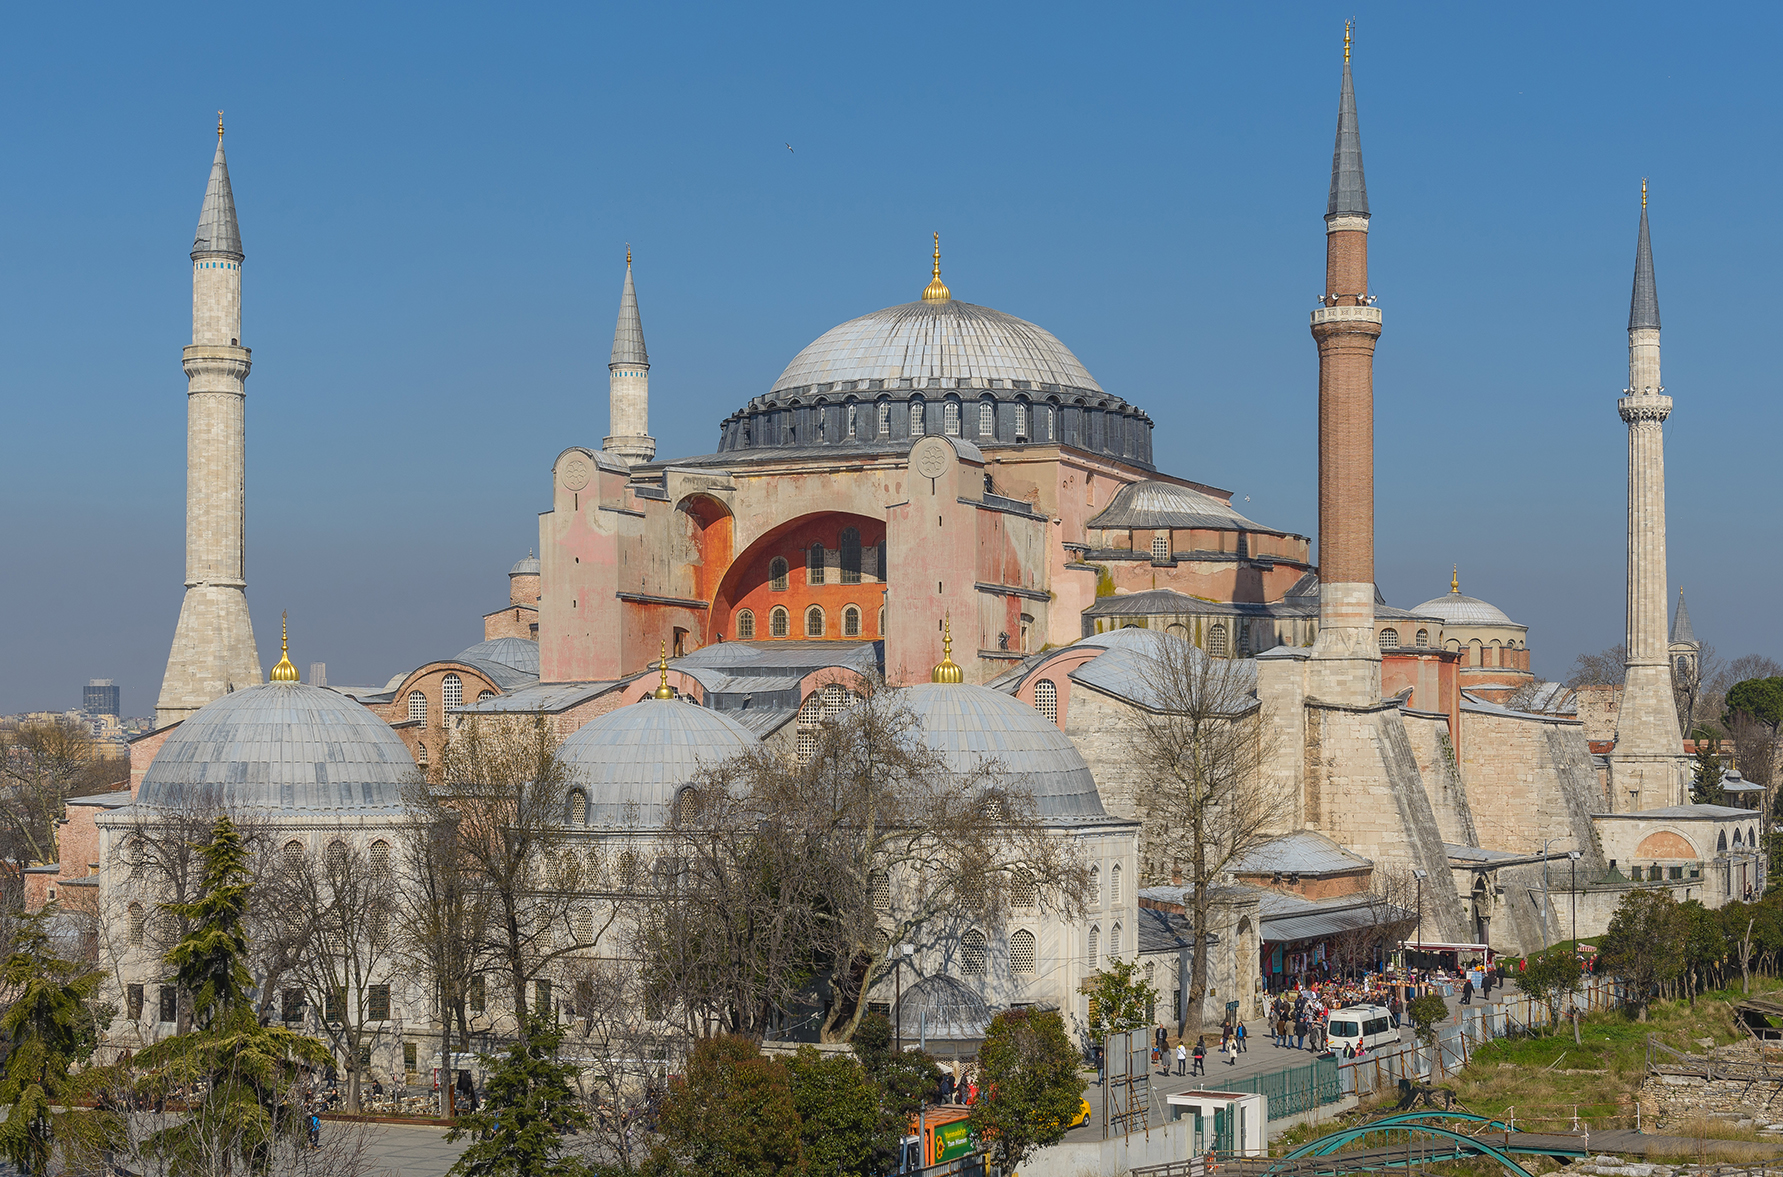 The Hagia Sophia church (now a museum) in Istanbul, Turkey